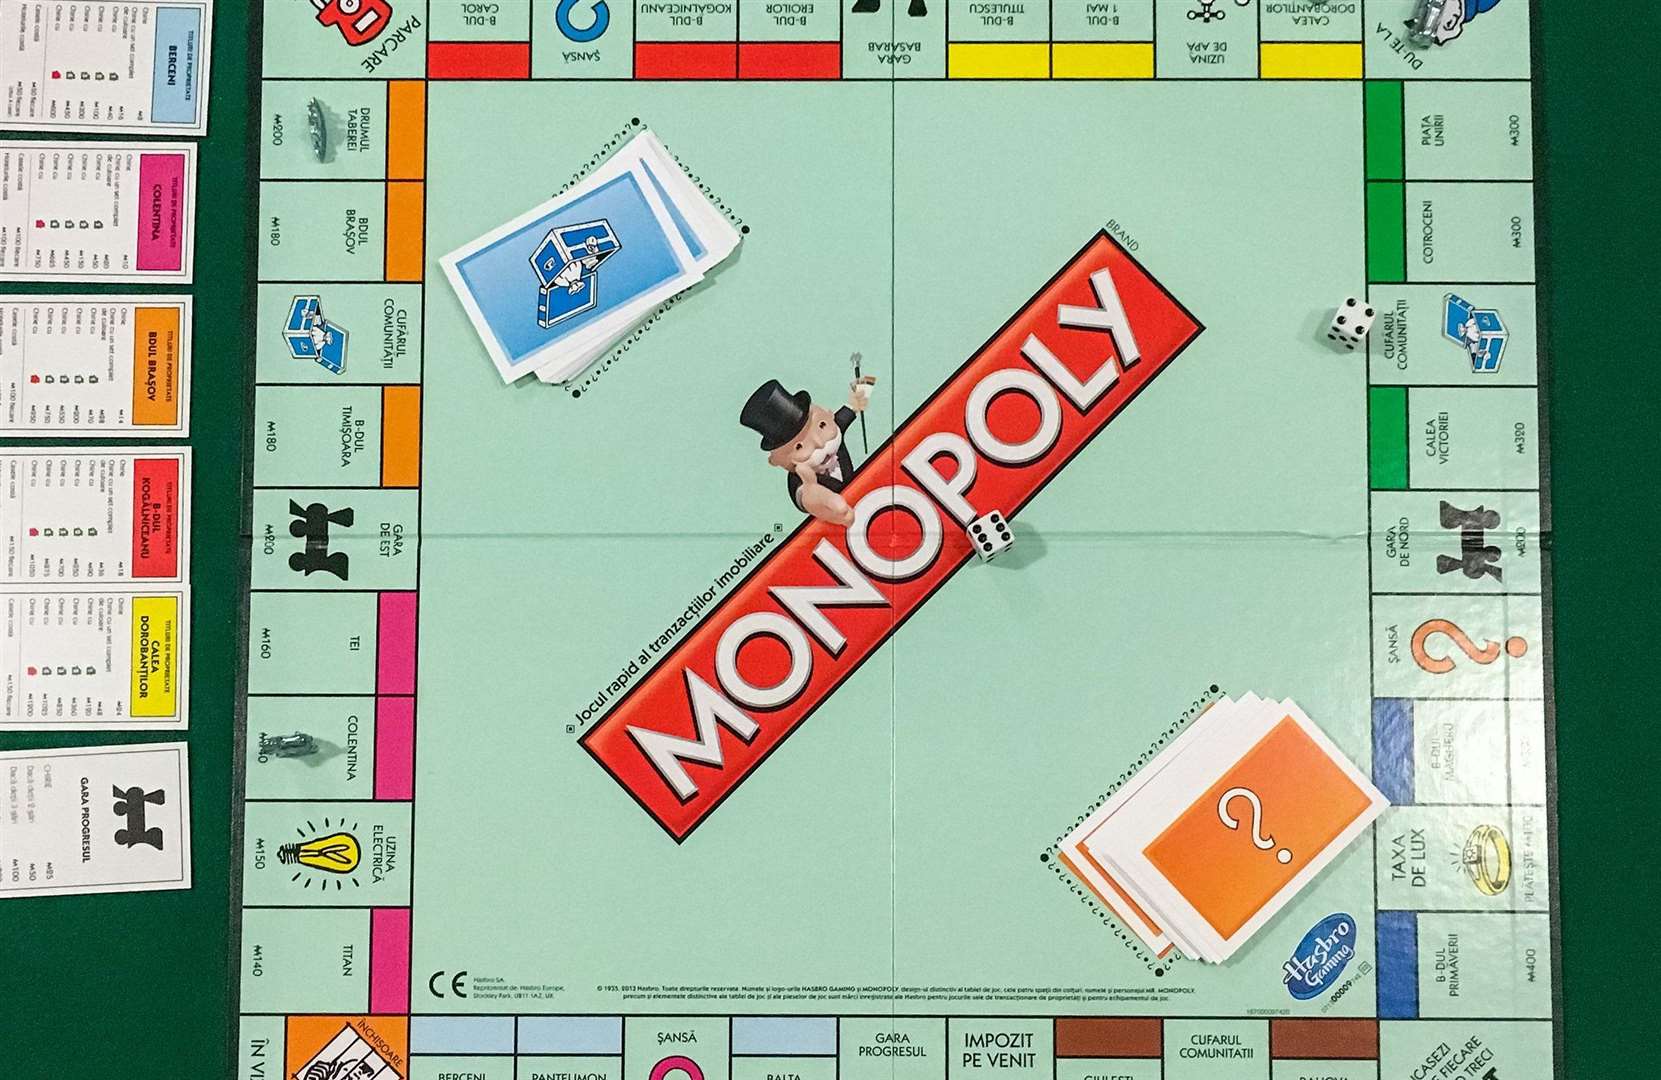 Folkestone set to get special edition Monopoly board game